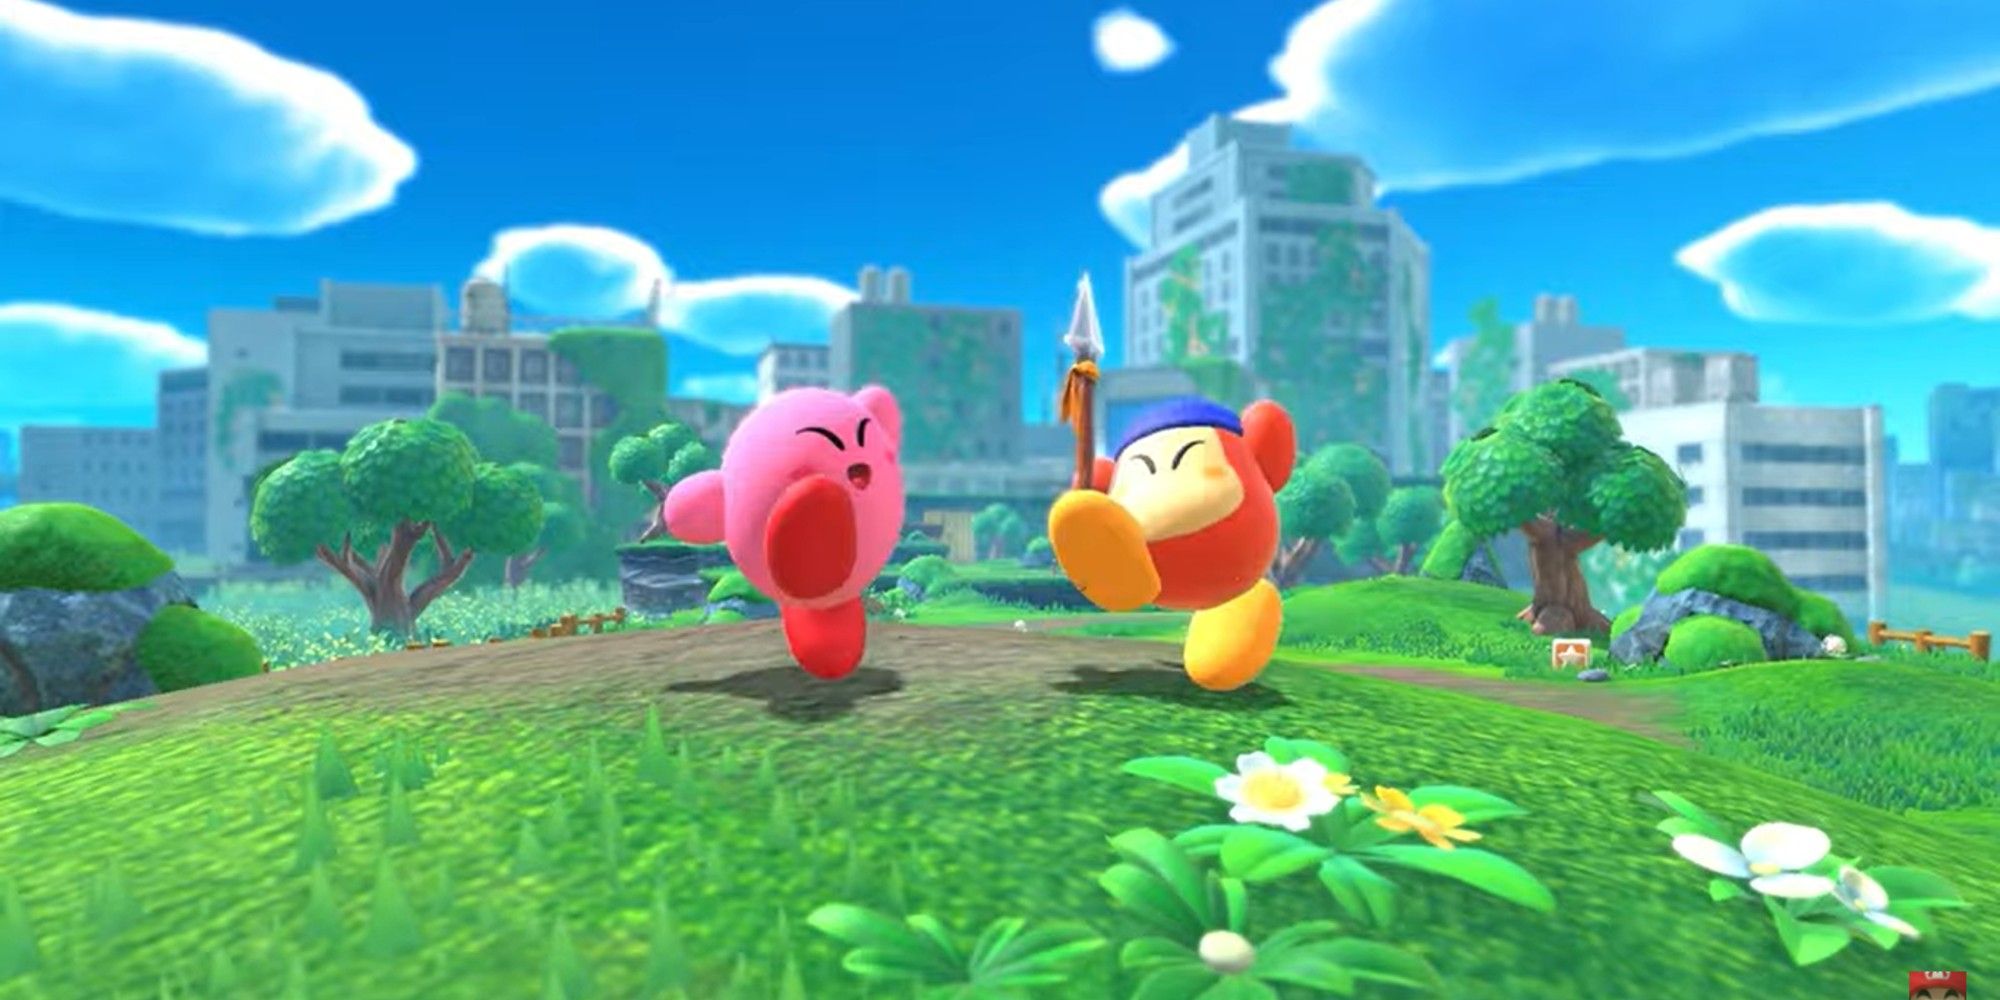 Kirby and Bandana Waddle Dee standing on a grassy hill